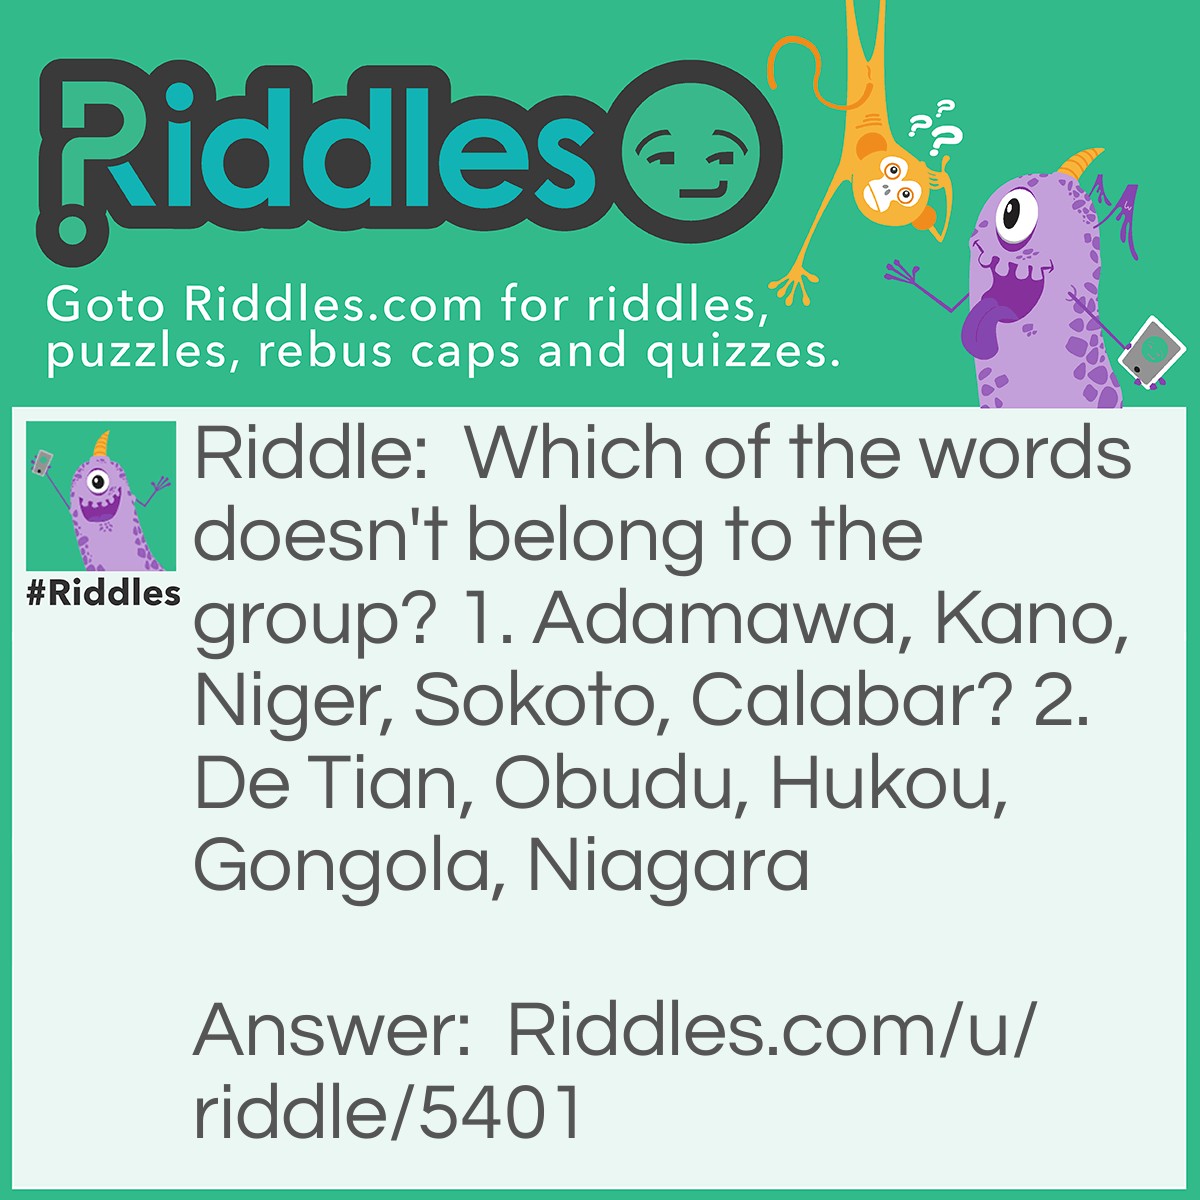 Riddle: Which of the words doesn't belong to the group? 1. Adamawa, Kano, Niger, Sokoto, Calabar? 2. De Tian, Obudu, Hukou, Gongola, Niagara Answer: 1. Niger - All of them are states in Nigeria except Niger which is a state, country, and a river in Africa. 2. Gongola - All of them are waterfalls except Gongola which is a river.